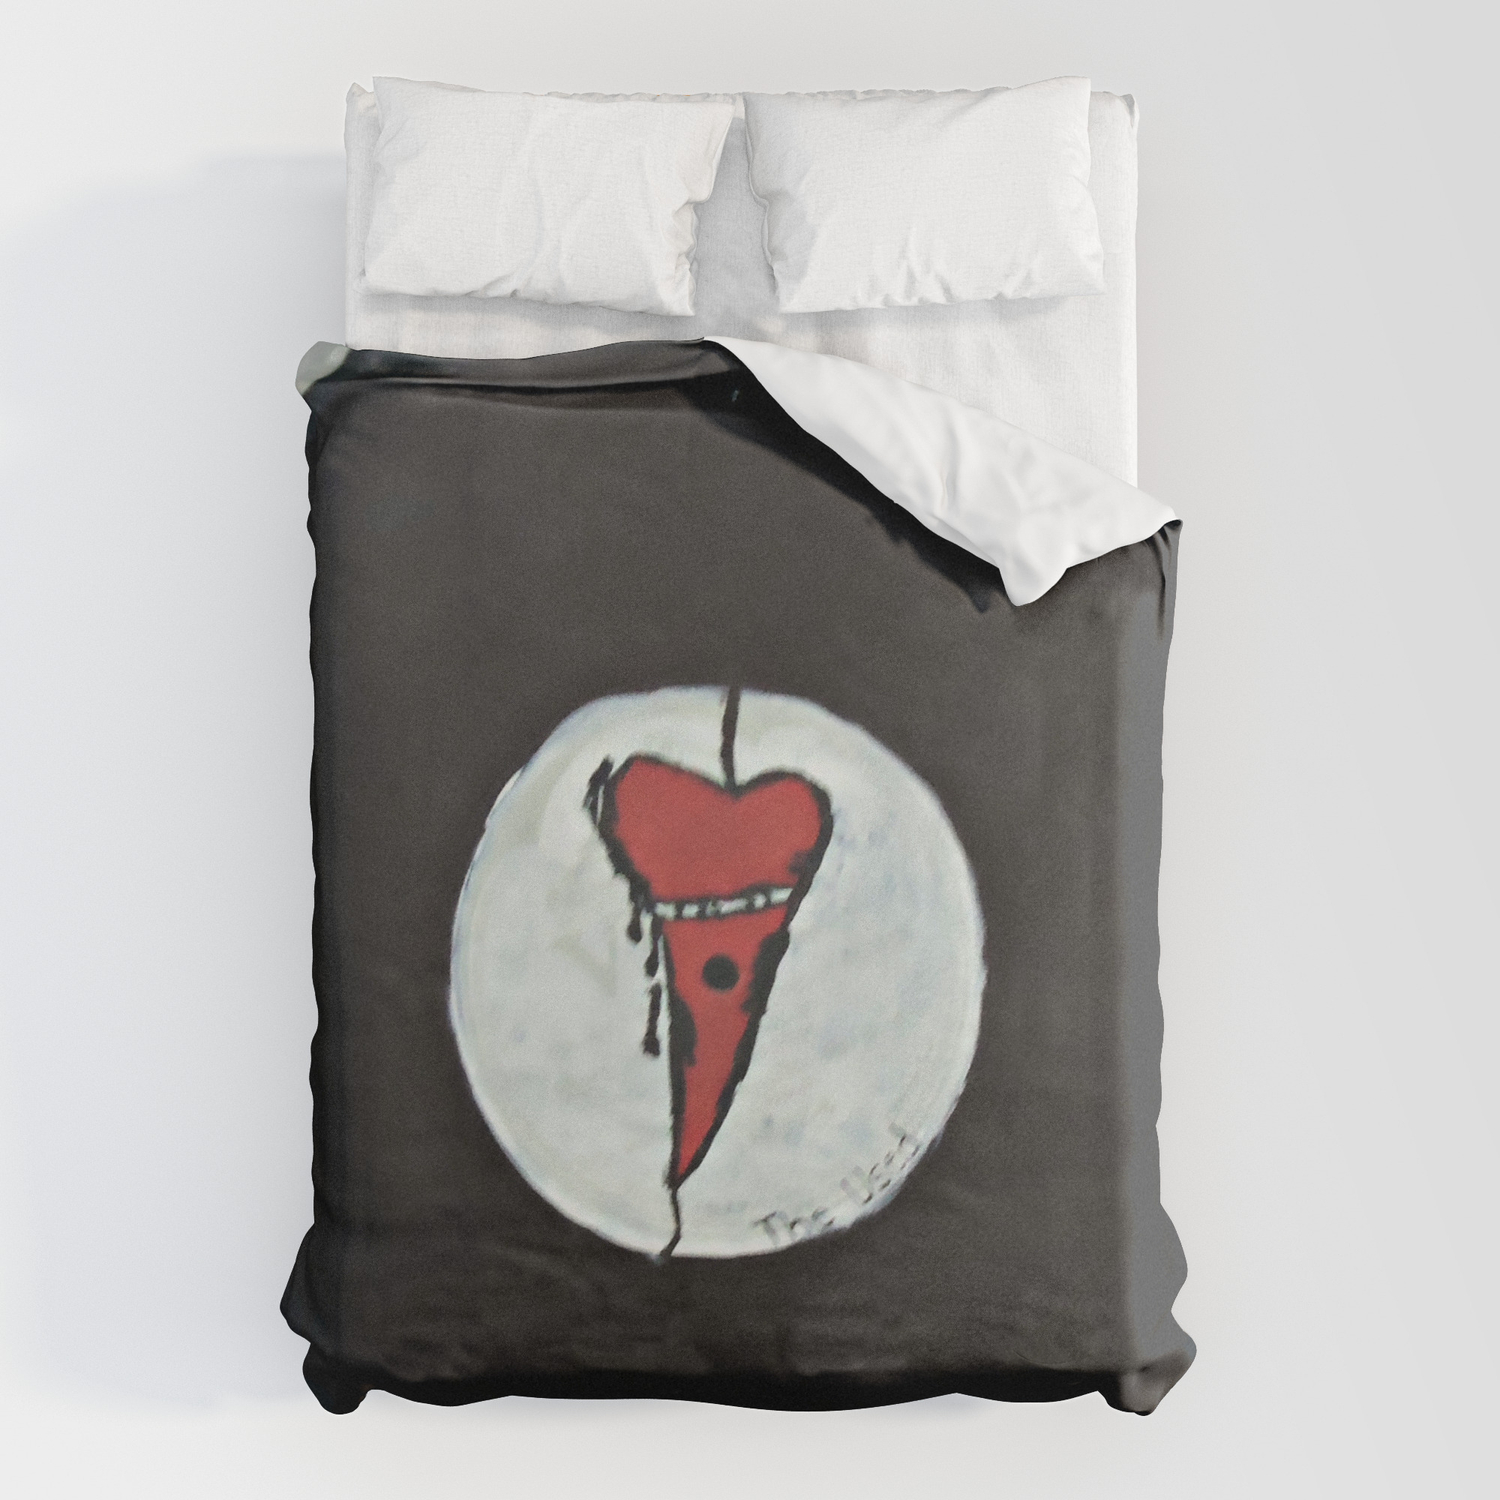 Vinyl Duvet Cover By Sarah Hinds Society6, Used Duvet Covers